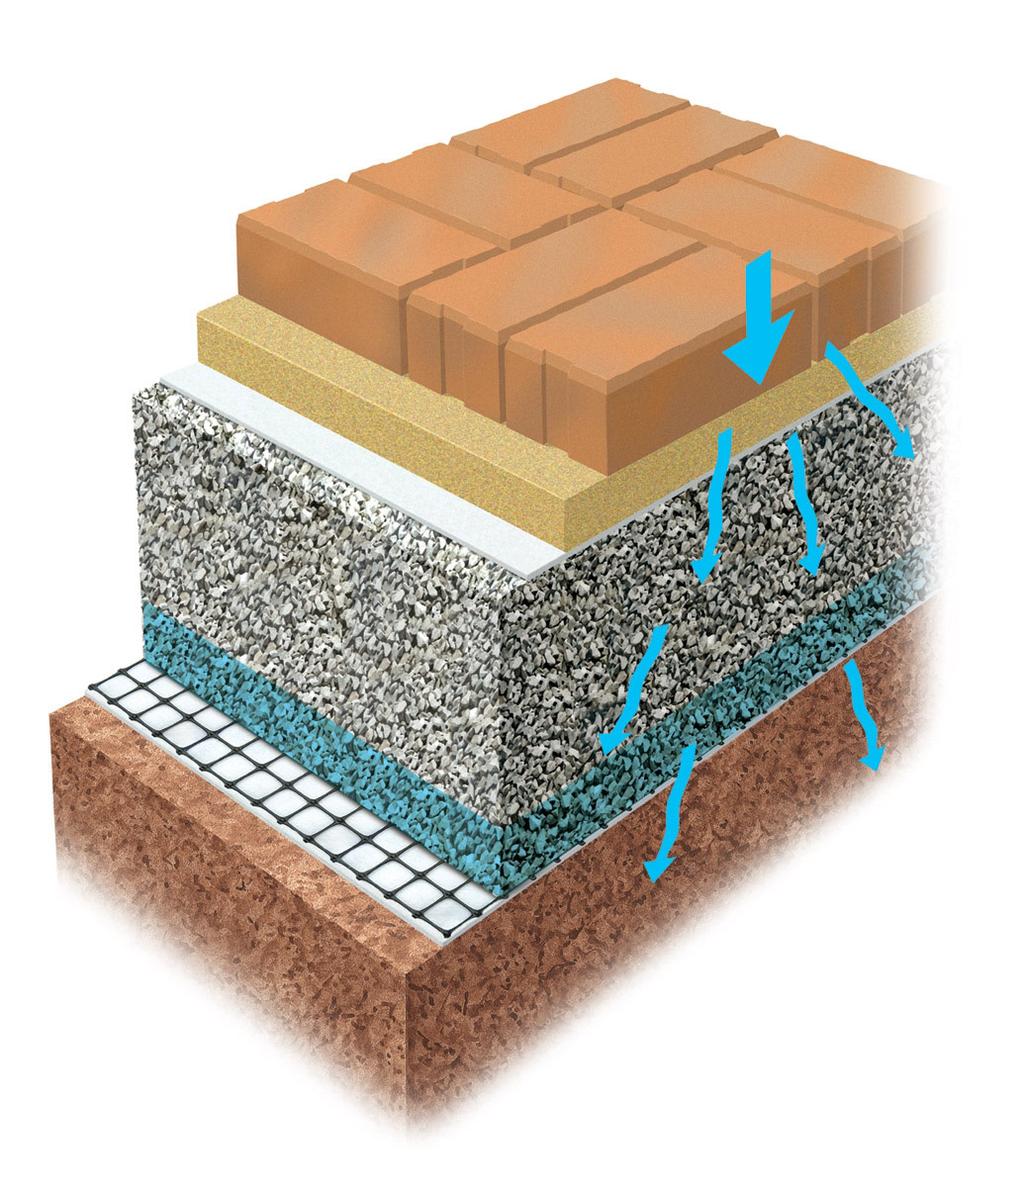 Gridtech SUDS Solutions Gridtech ATS Netlon ATS 400 reinforced rootzone Gravel Drain reinforced rootzone High void content aggregate sub-base/storage layer blinded with fine aggregate Subgrade Soil